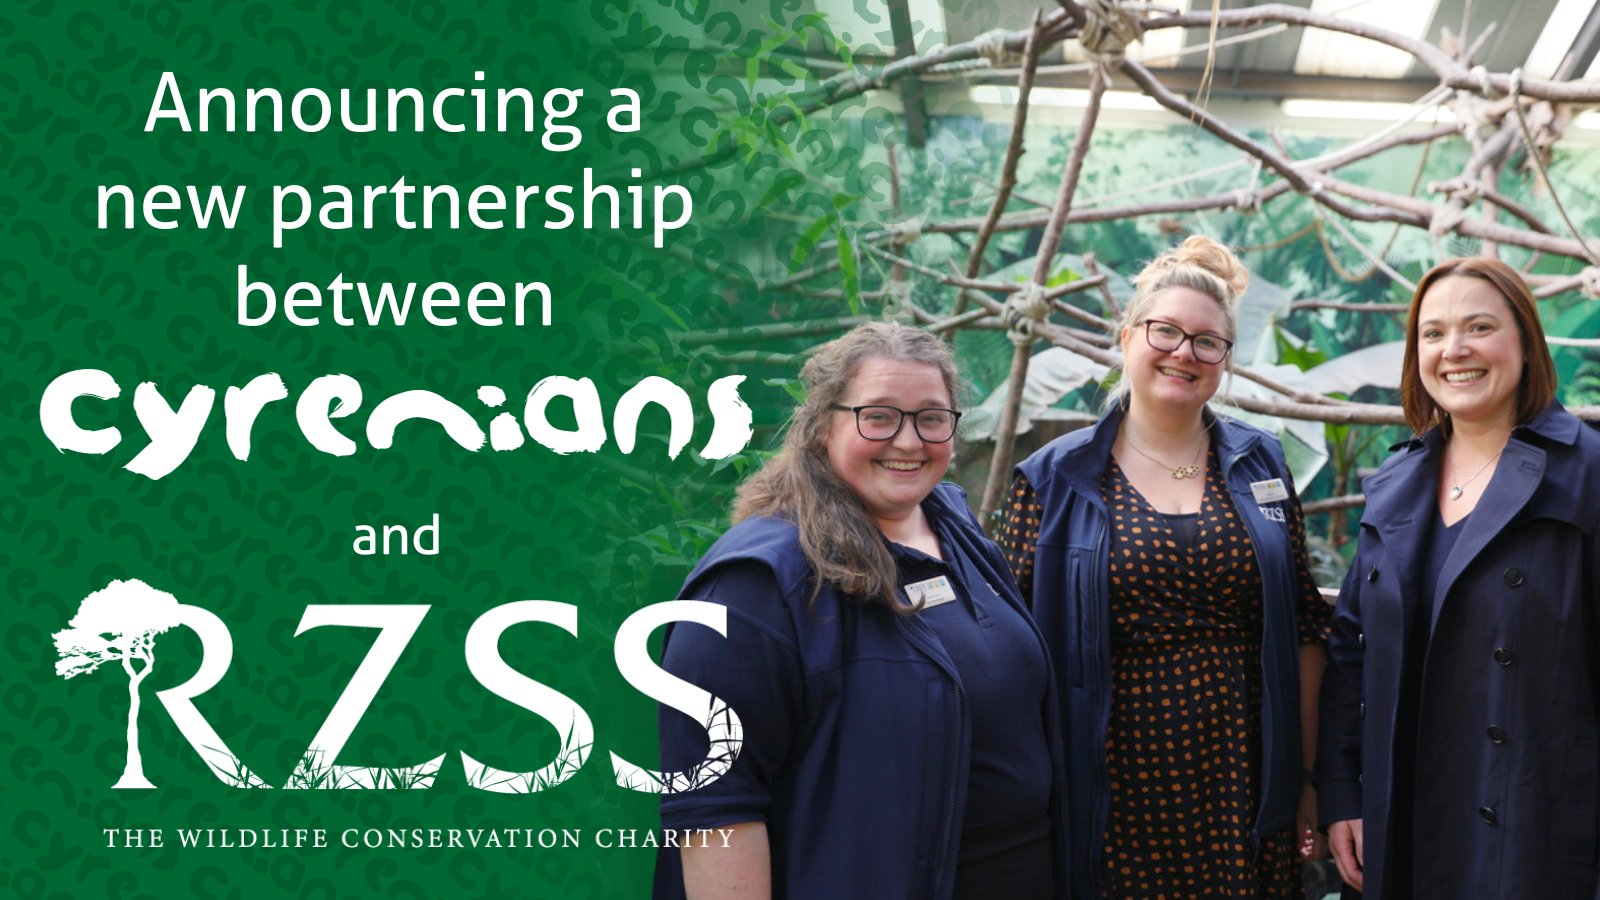 Cyrenians unveils RZSS partnership to support access to nature and careers for young people